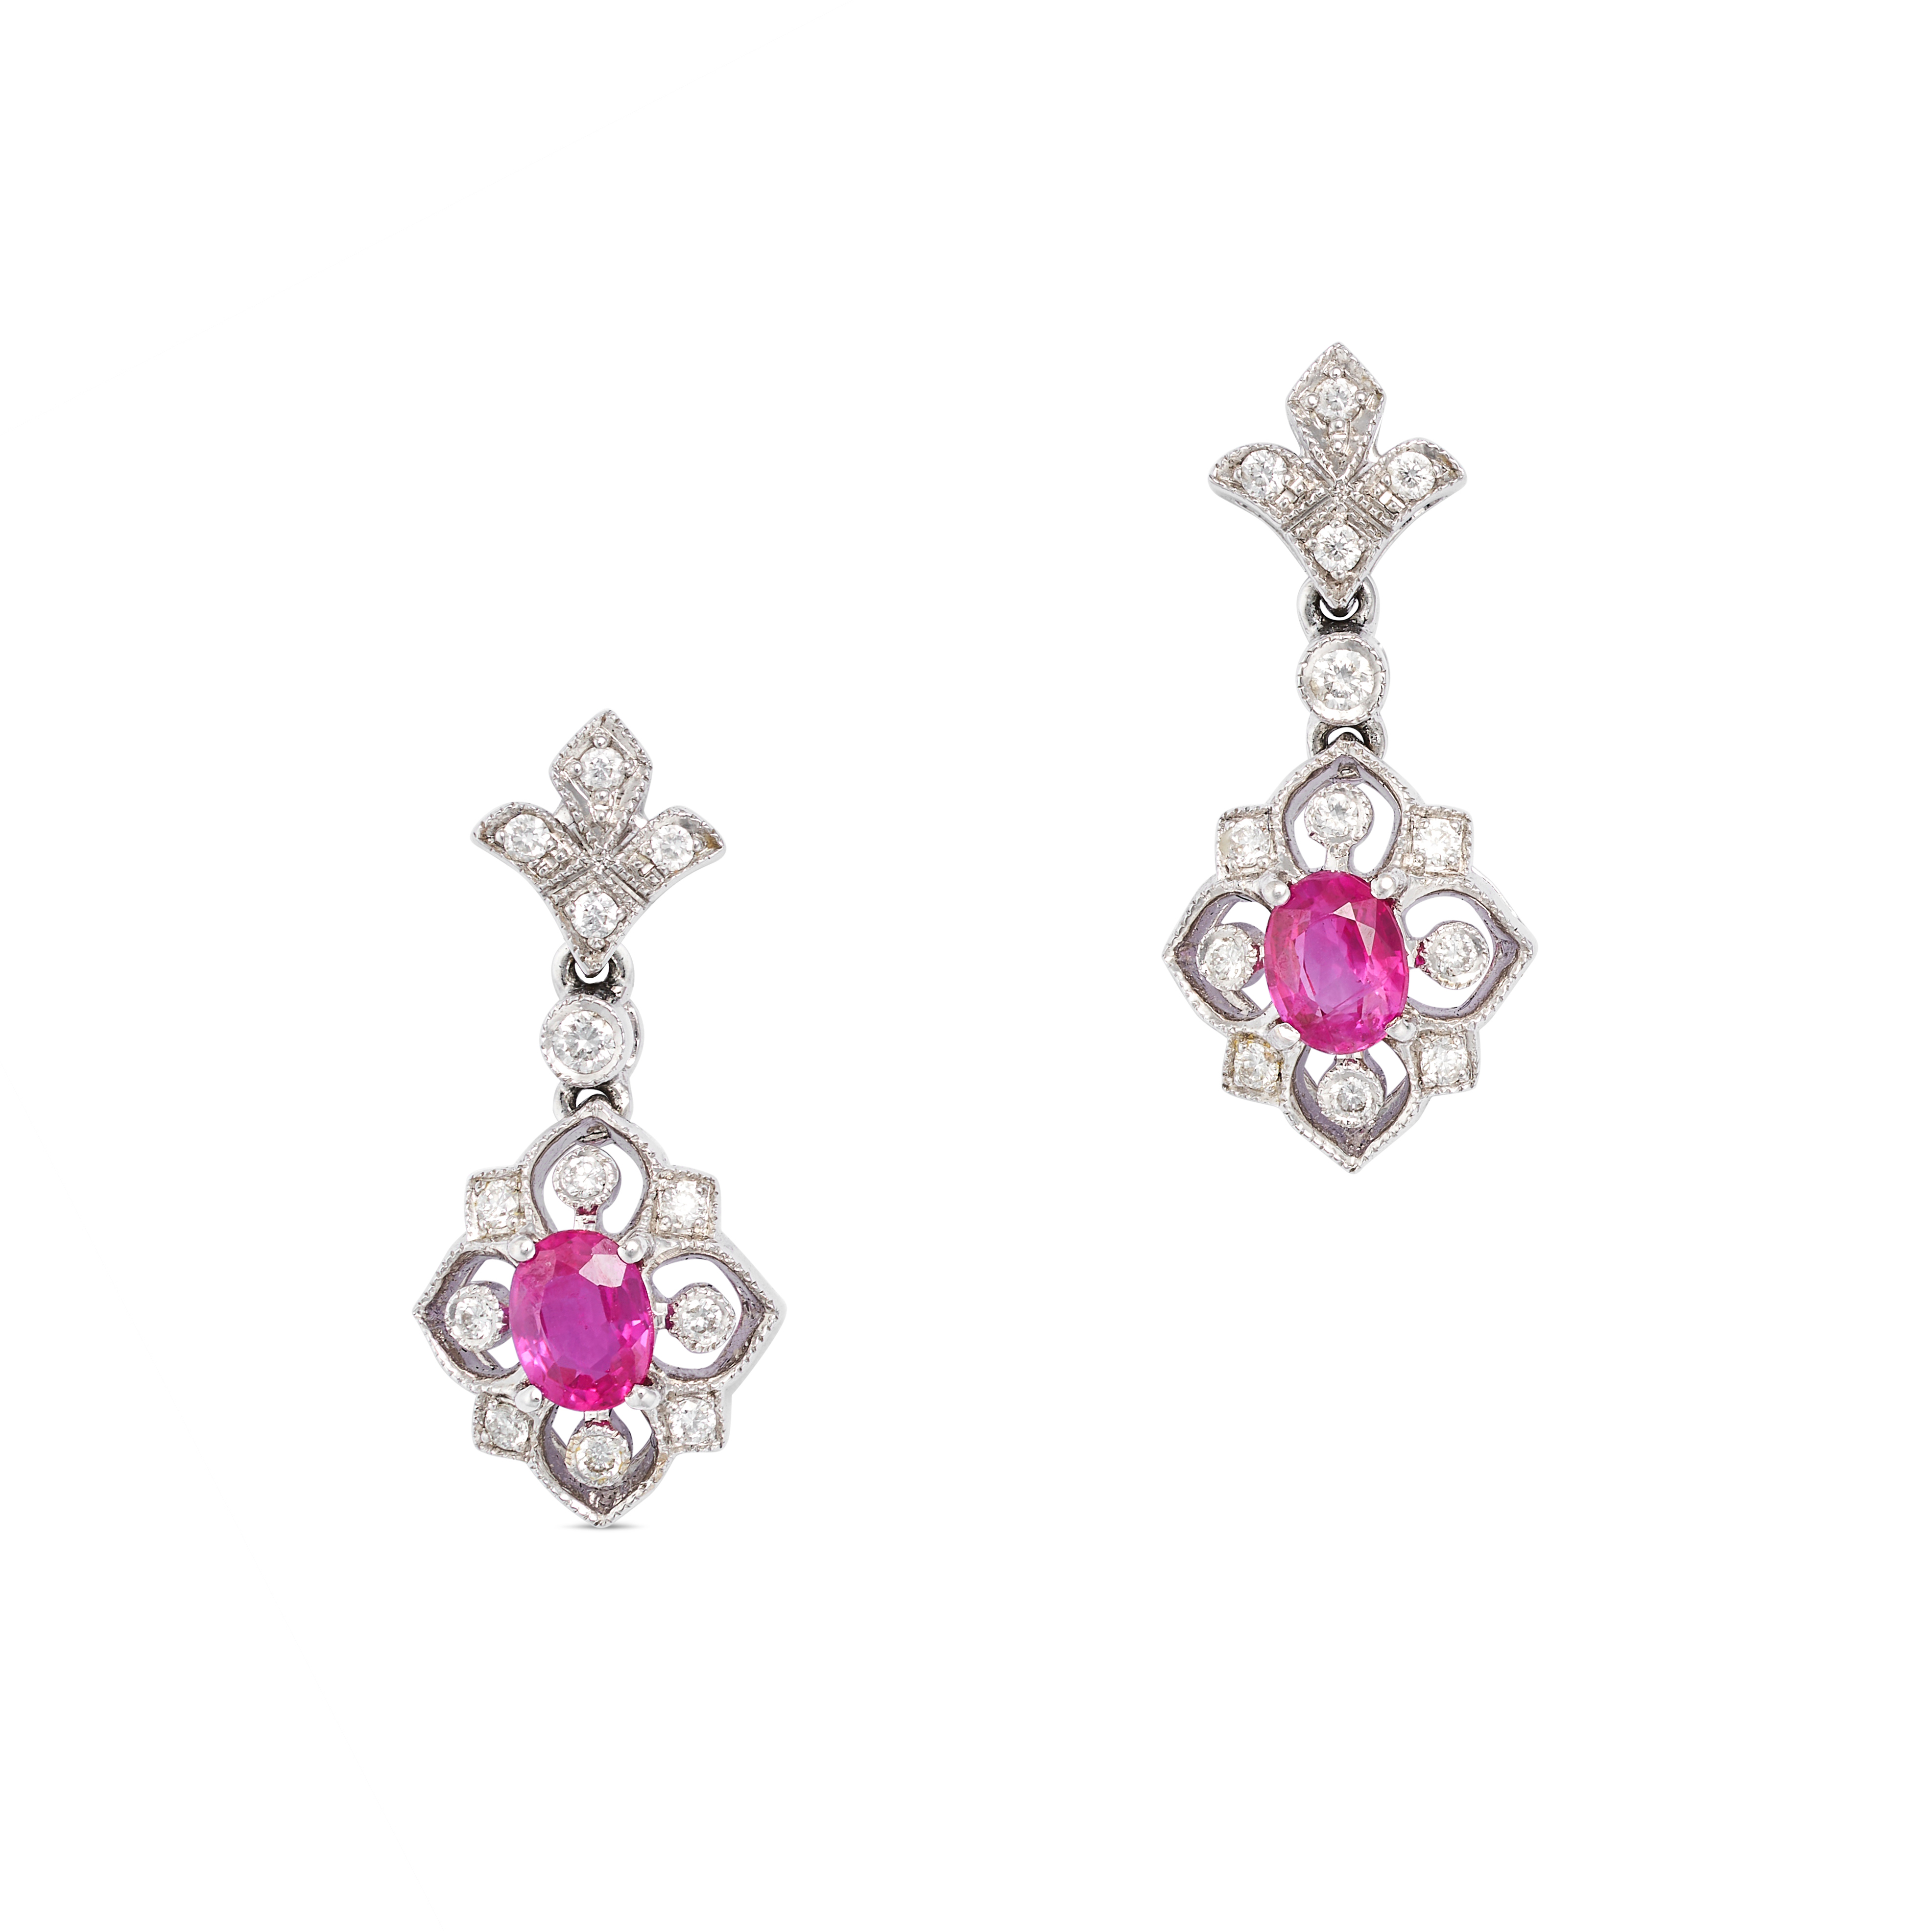 A PAIR OF RUBY AND DIAMOND DROP EARRINGS in 18ct white gold, each set with round brilliant cut di...